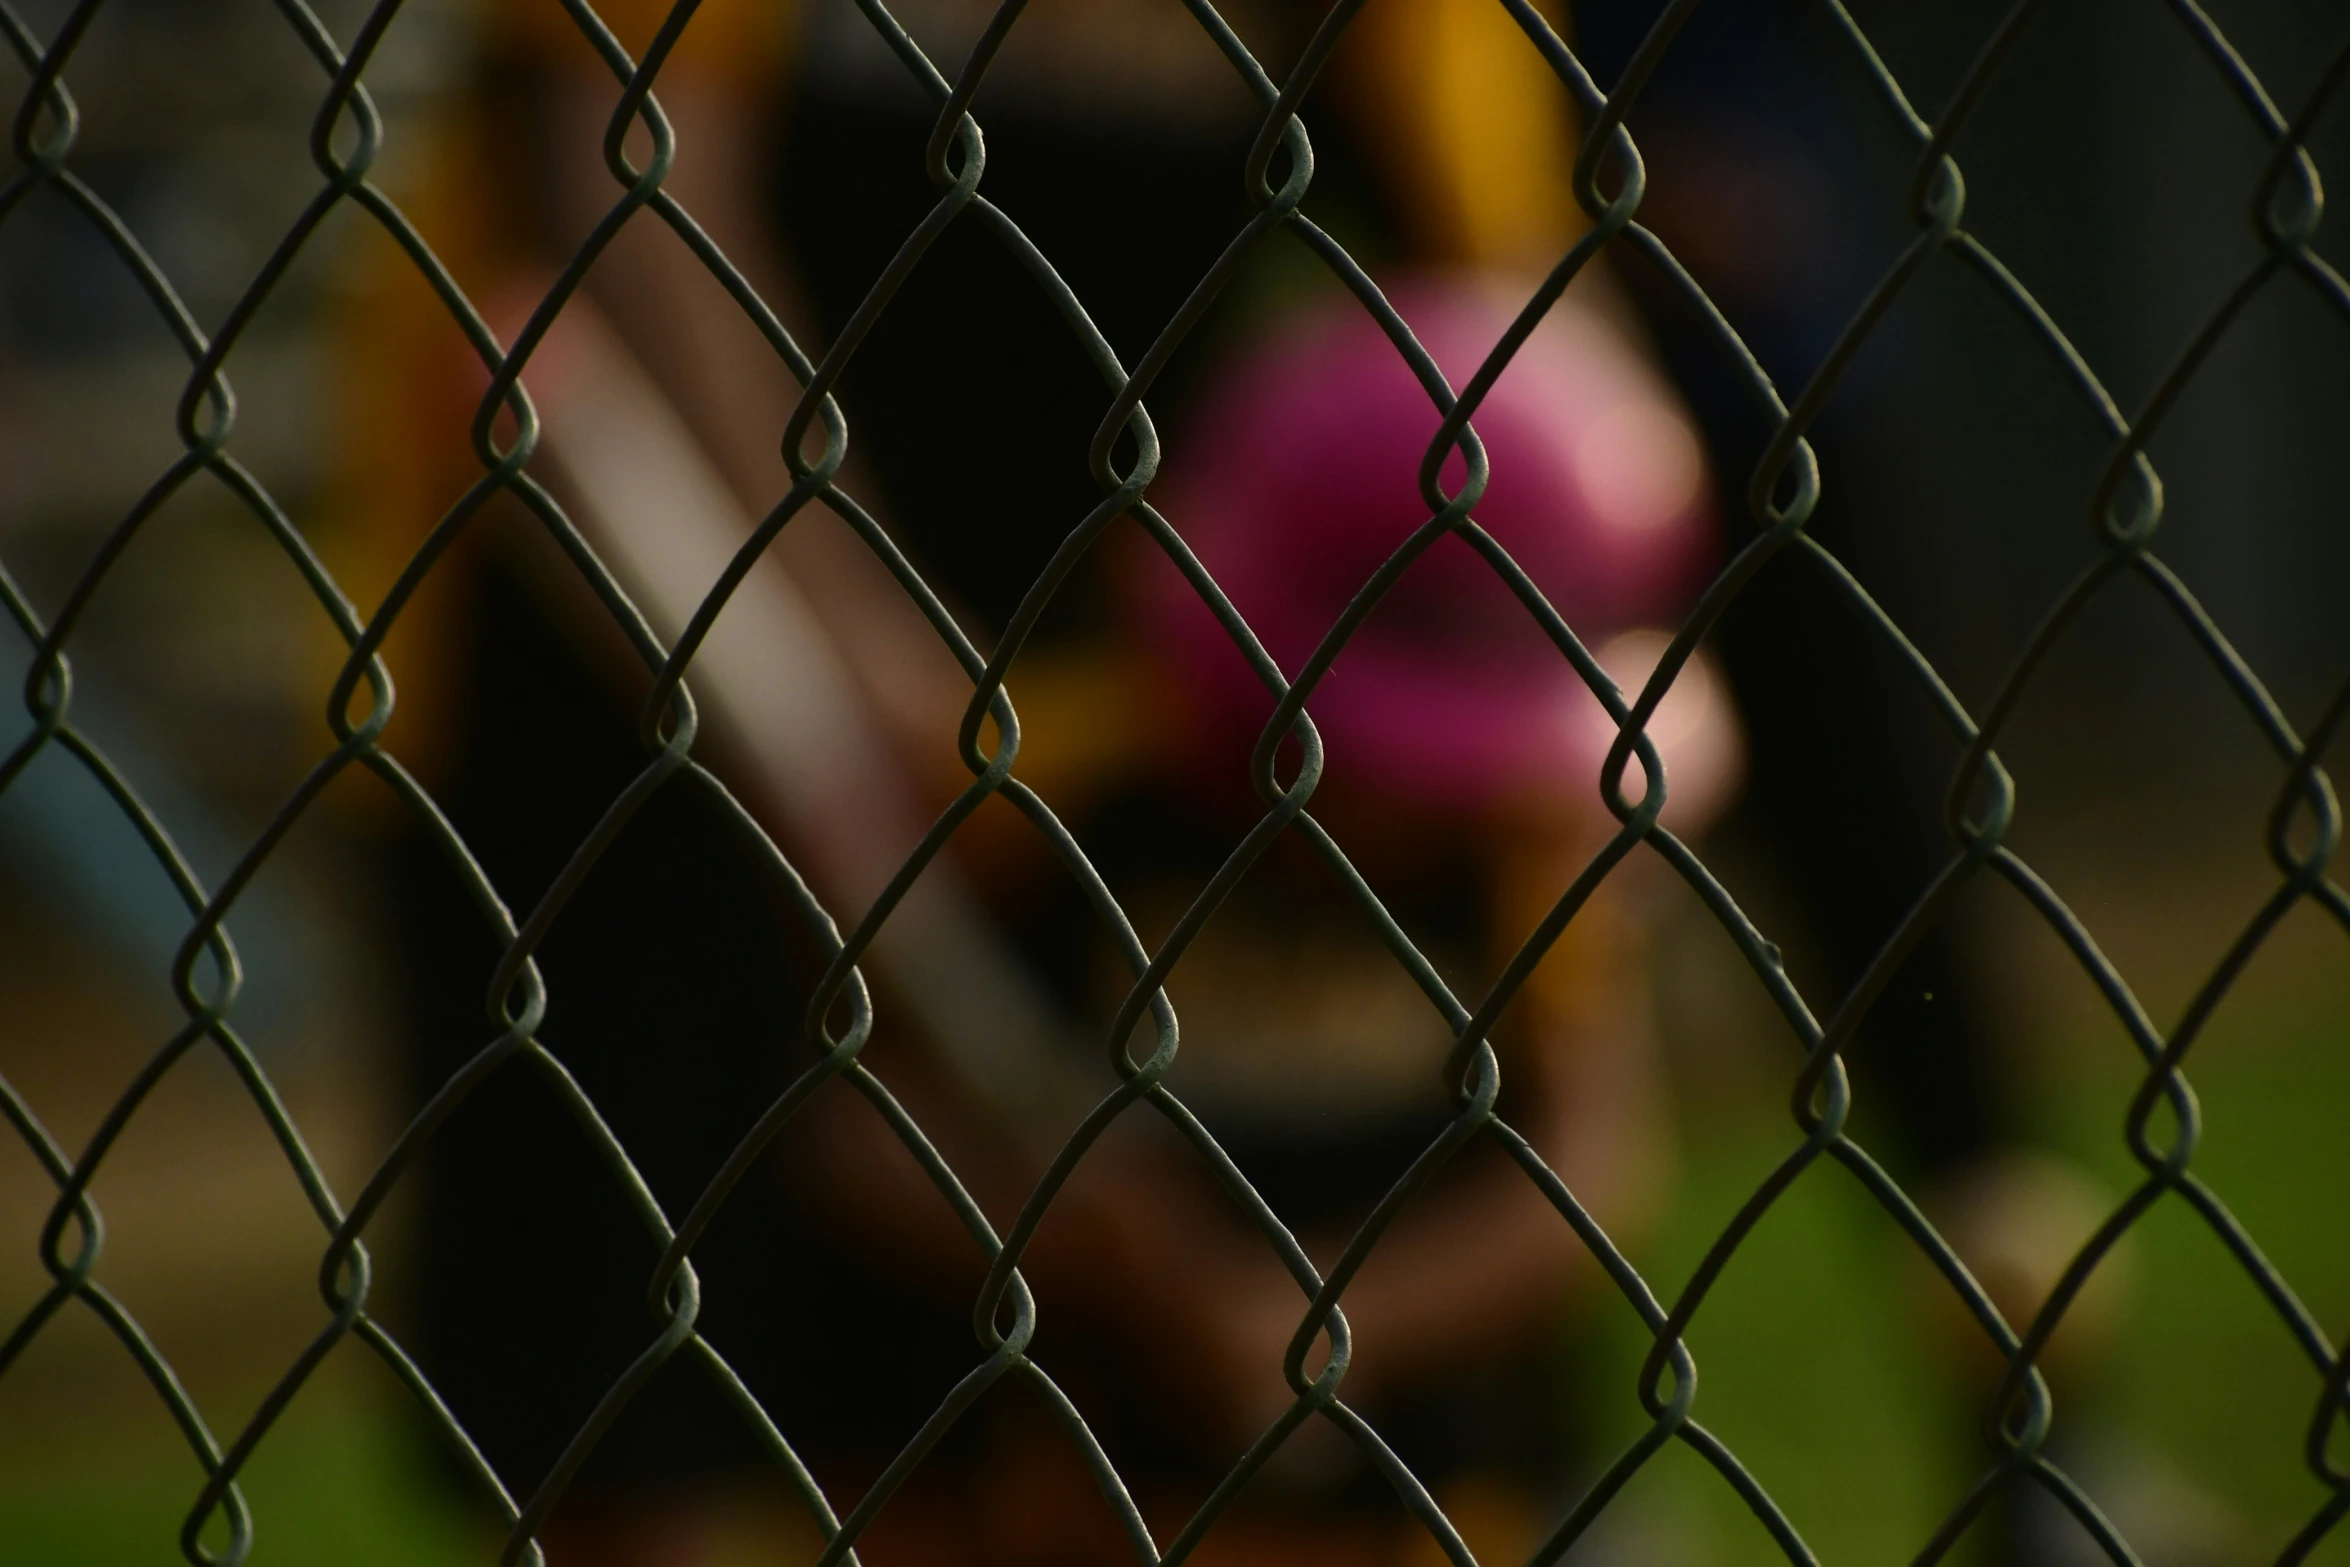 a blurred woman standing behind a fence holding her hand near the camera